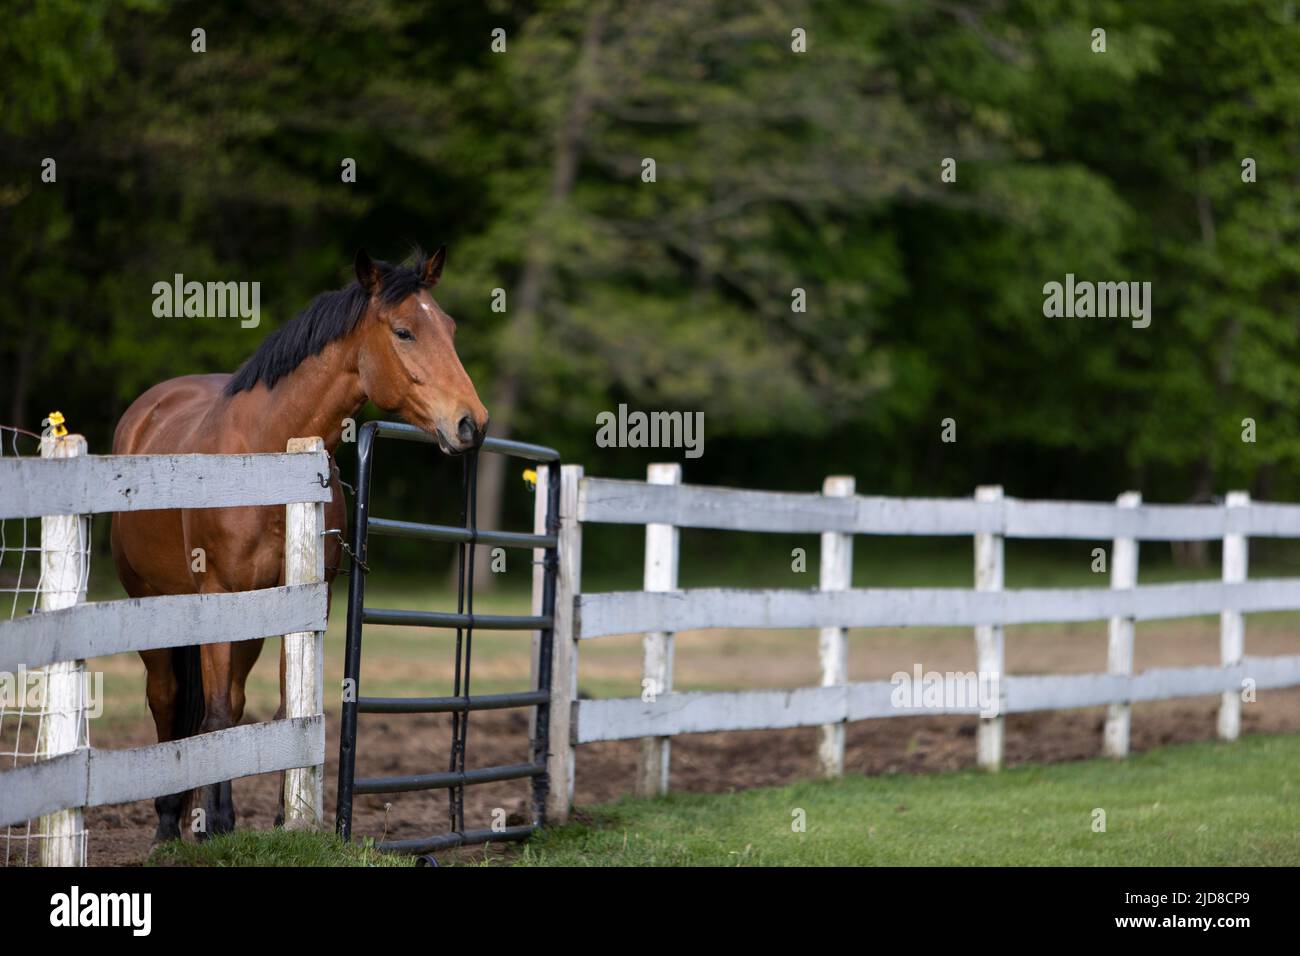 One horse standing at a gate at a horse farm. Stock Photo